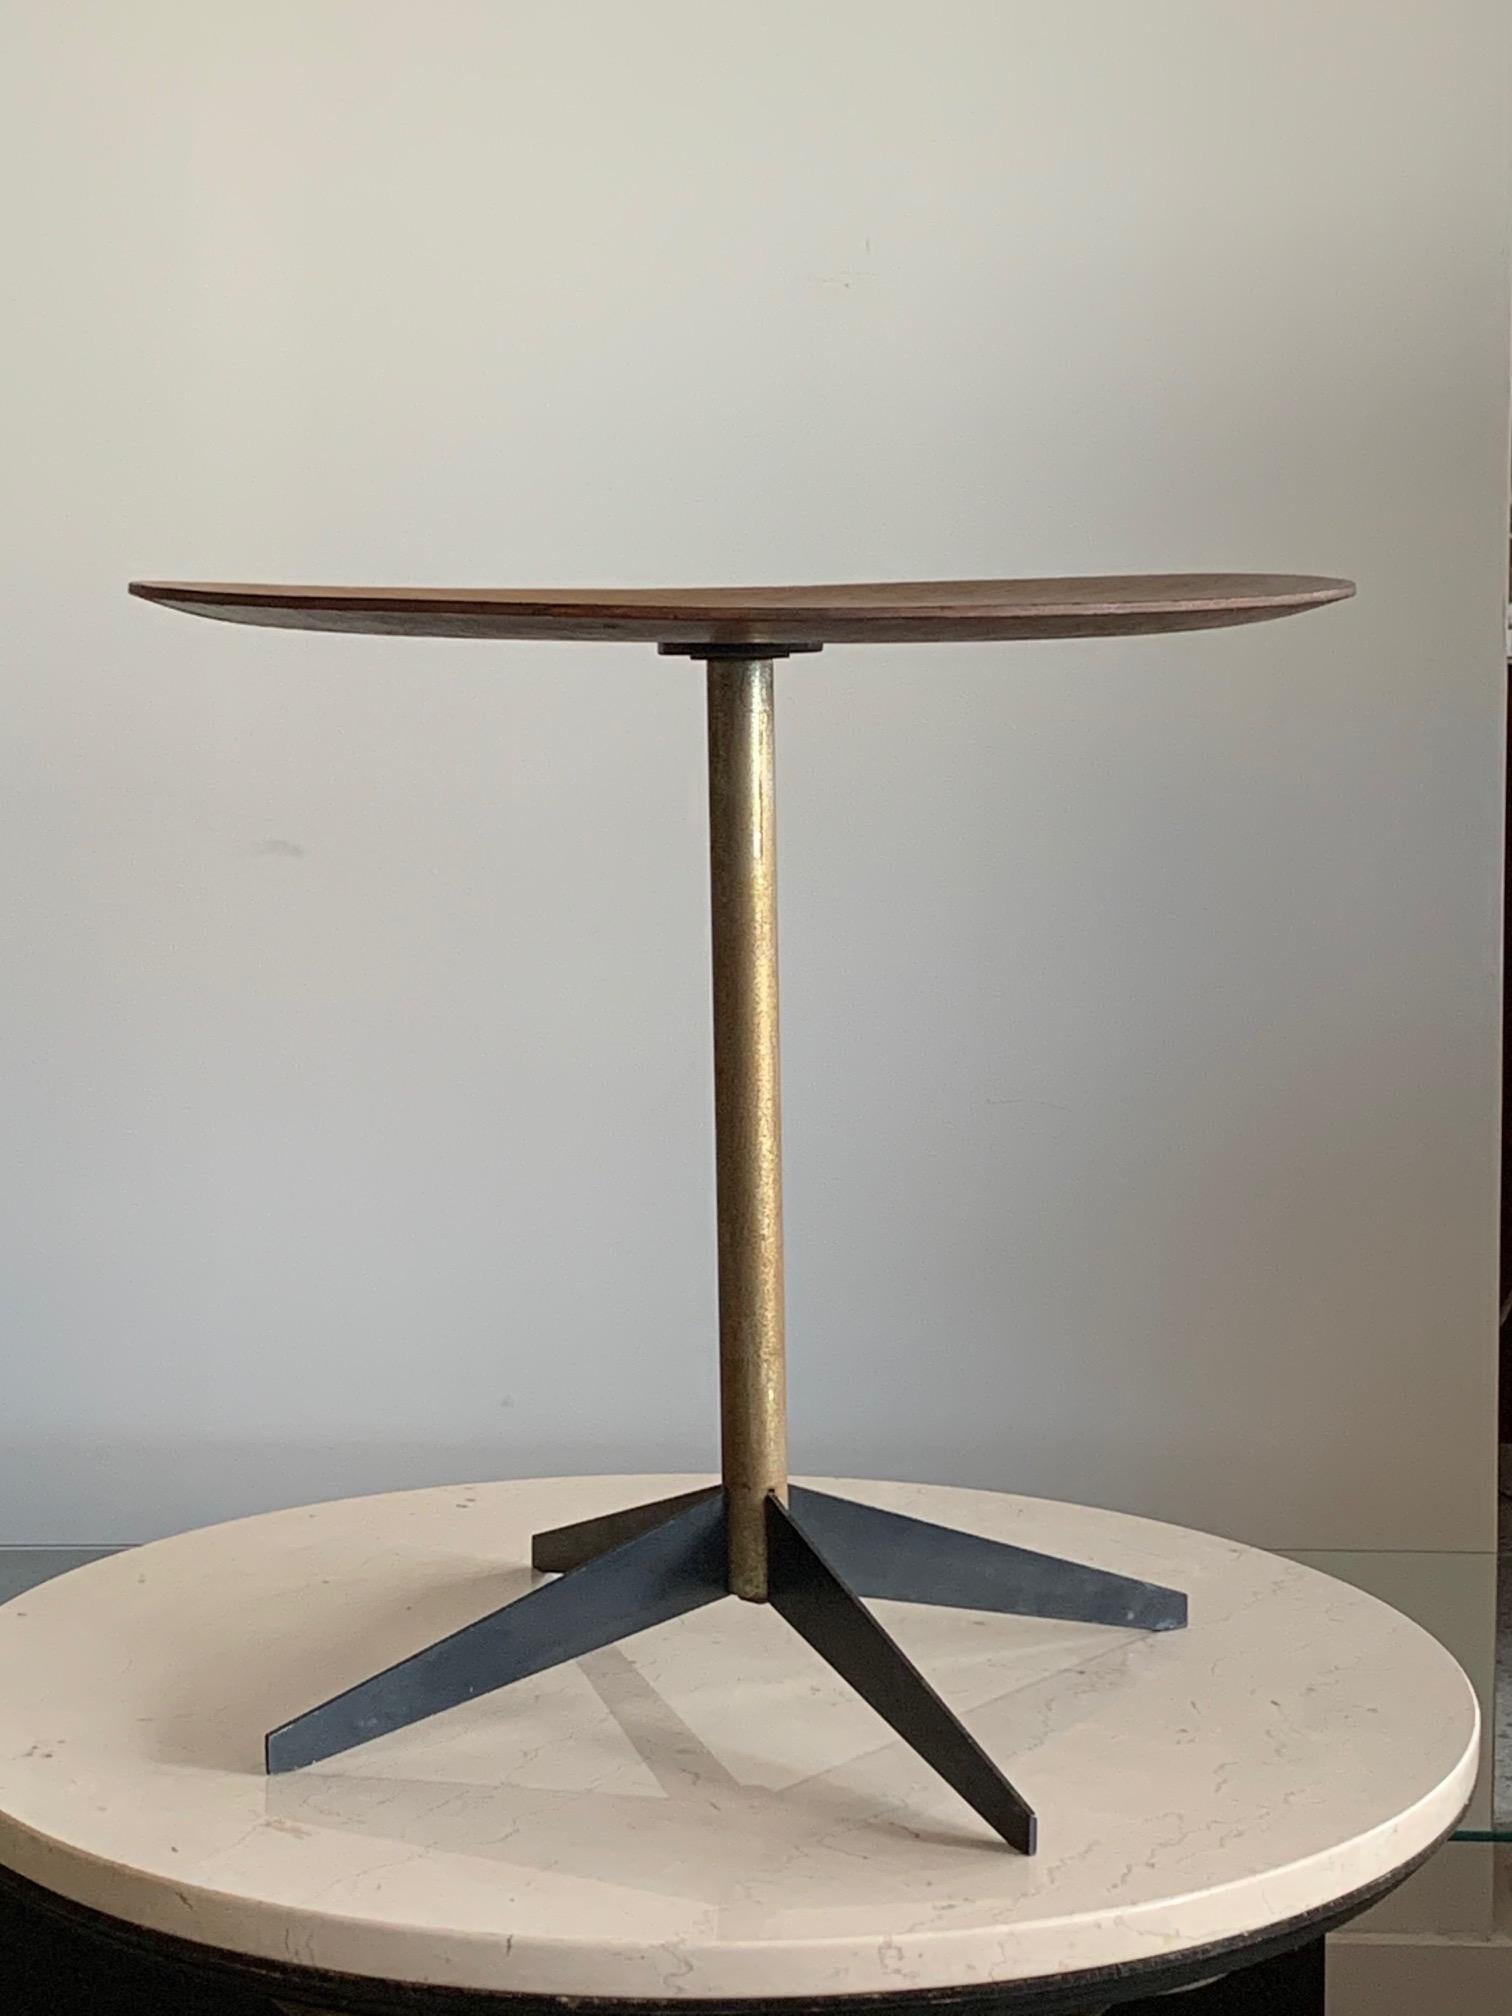 An early side table by George Nelson for Herman Miller with a steel four prong base. From the estate of Irving Harper. This table has patina and character.